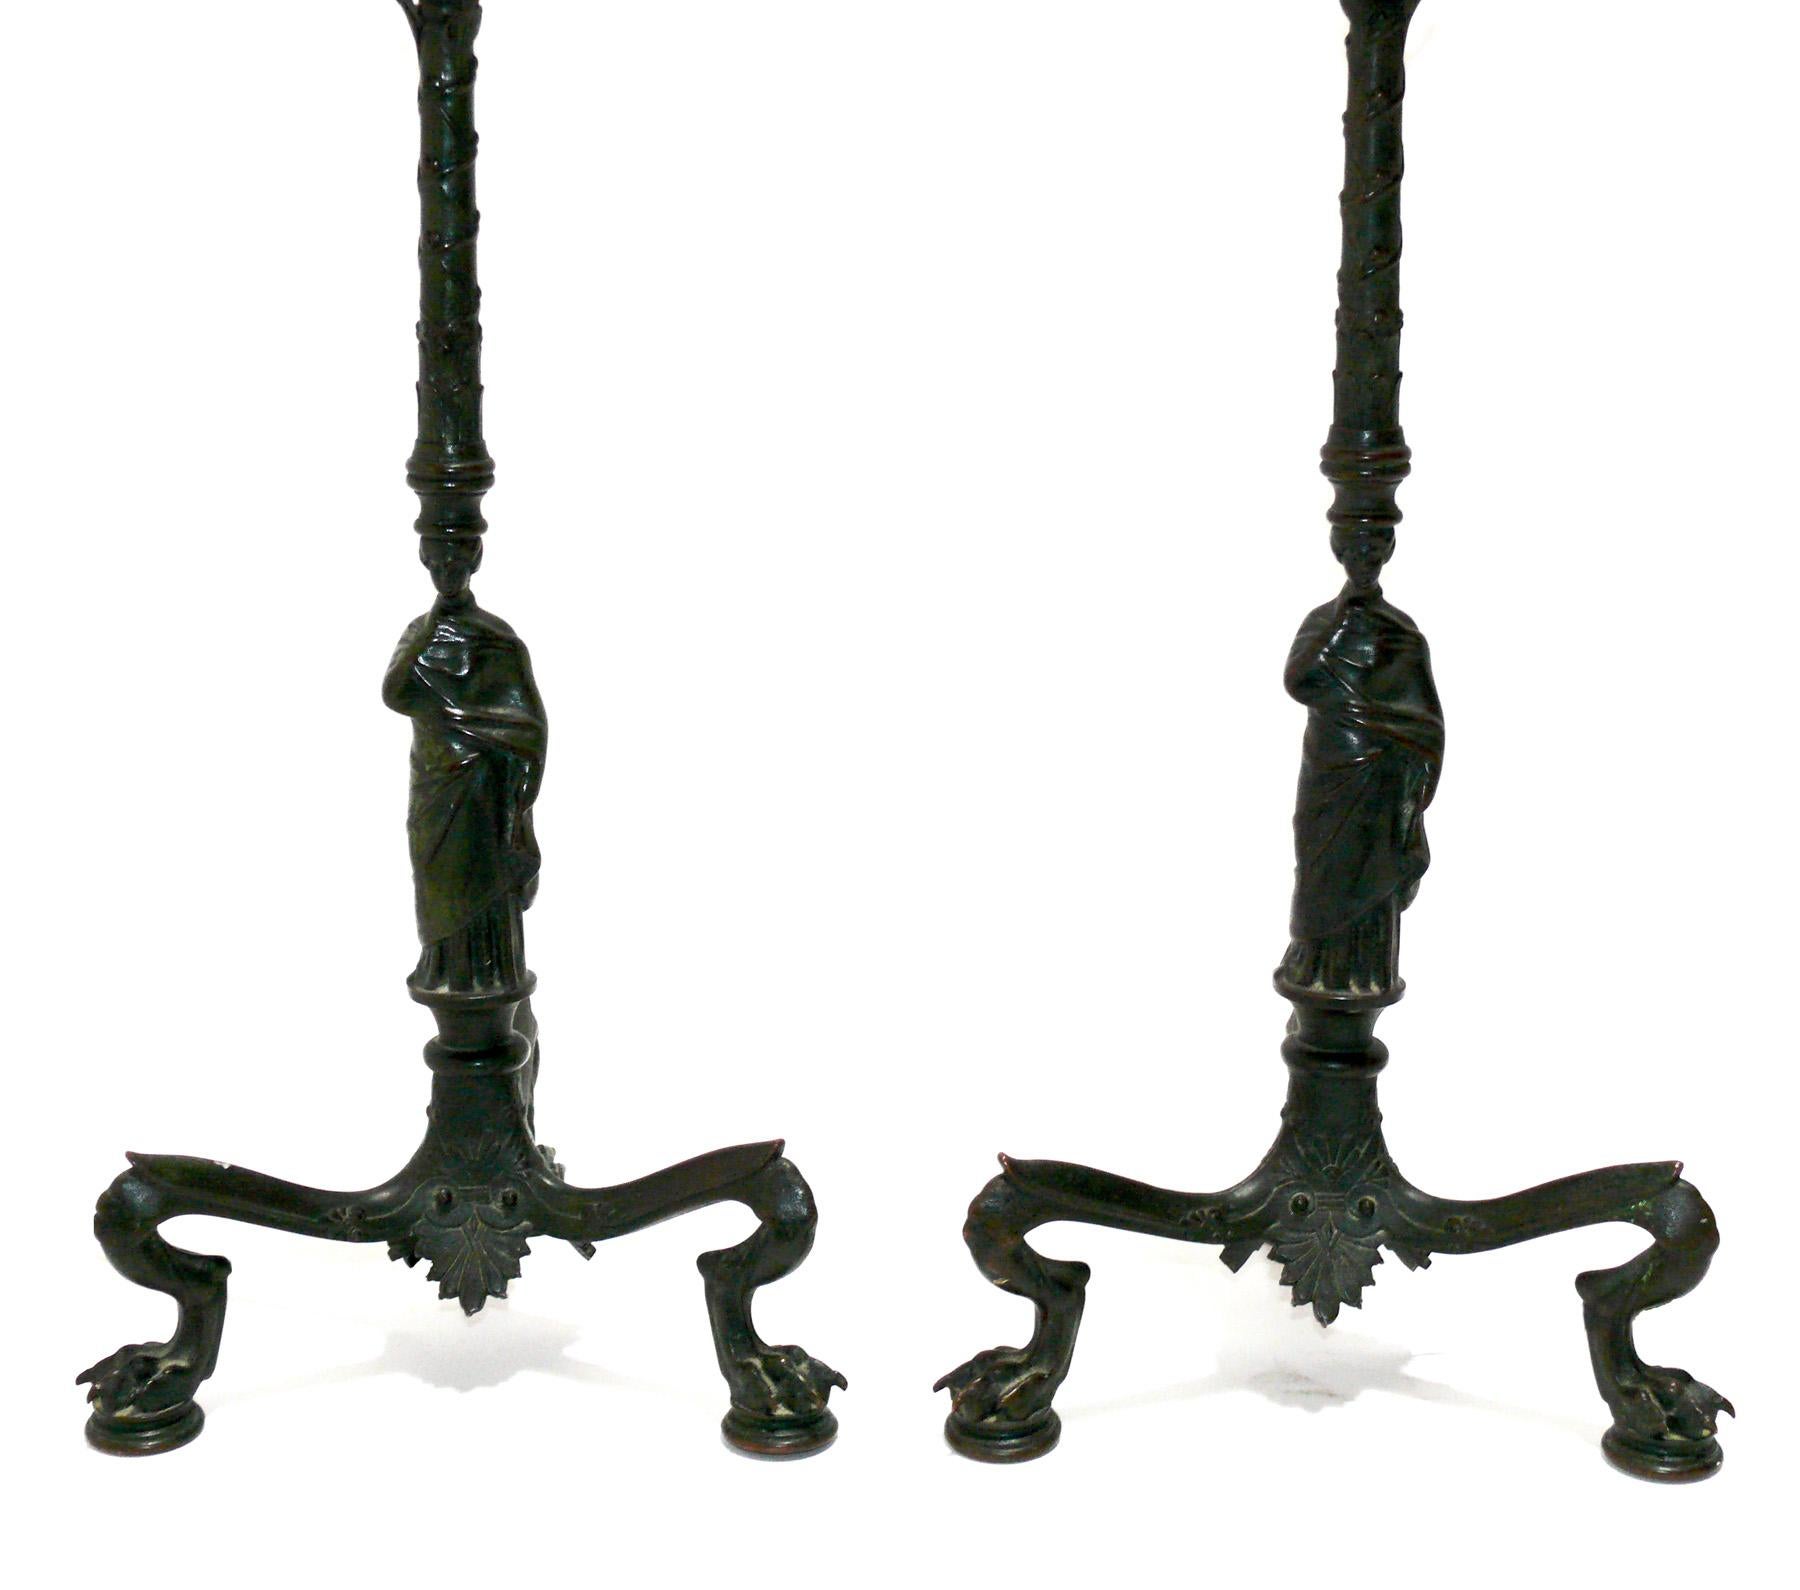 Pair of Roman bronze neoclassical lamps, probably French, circa 1920s. They retain their warm original patina. They have been rewired and are ready to use. The price noted includes the shades.